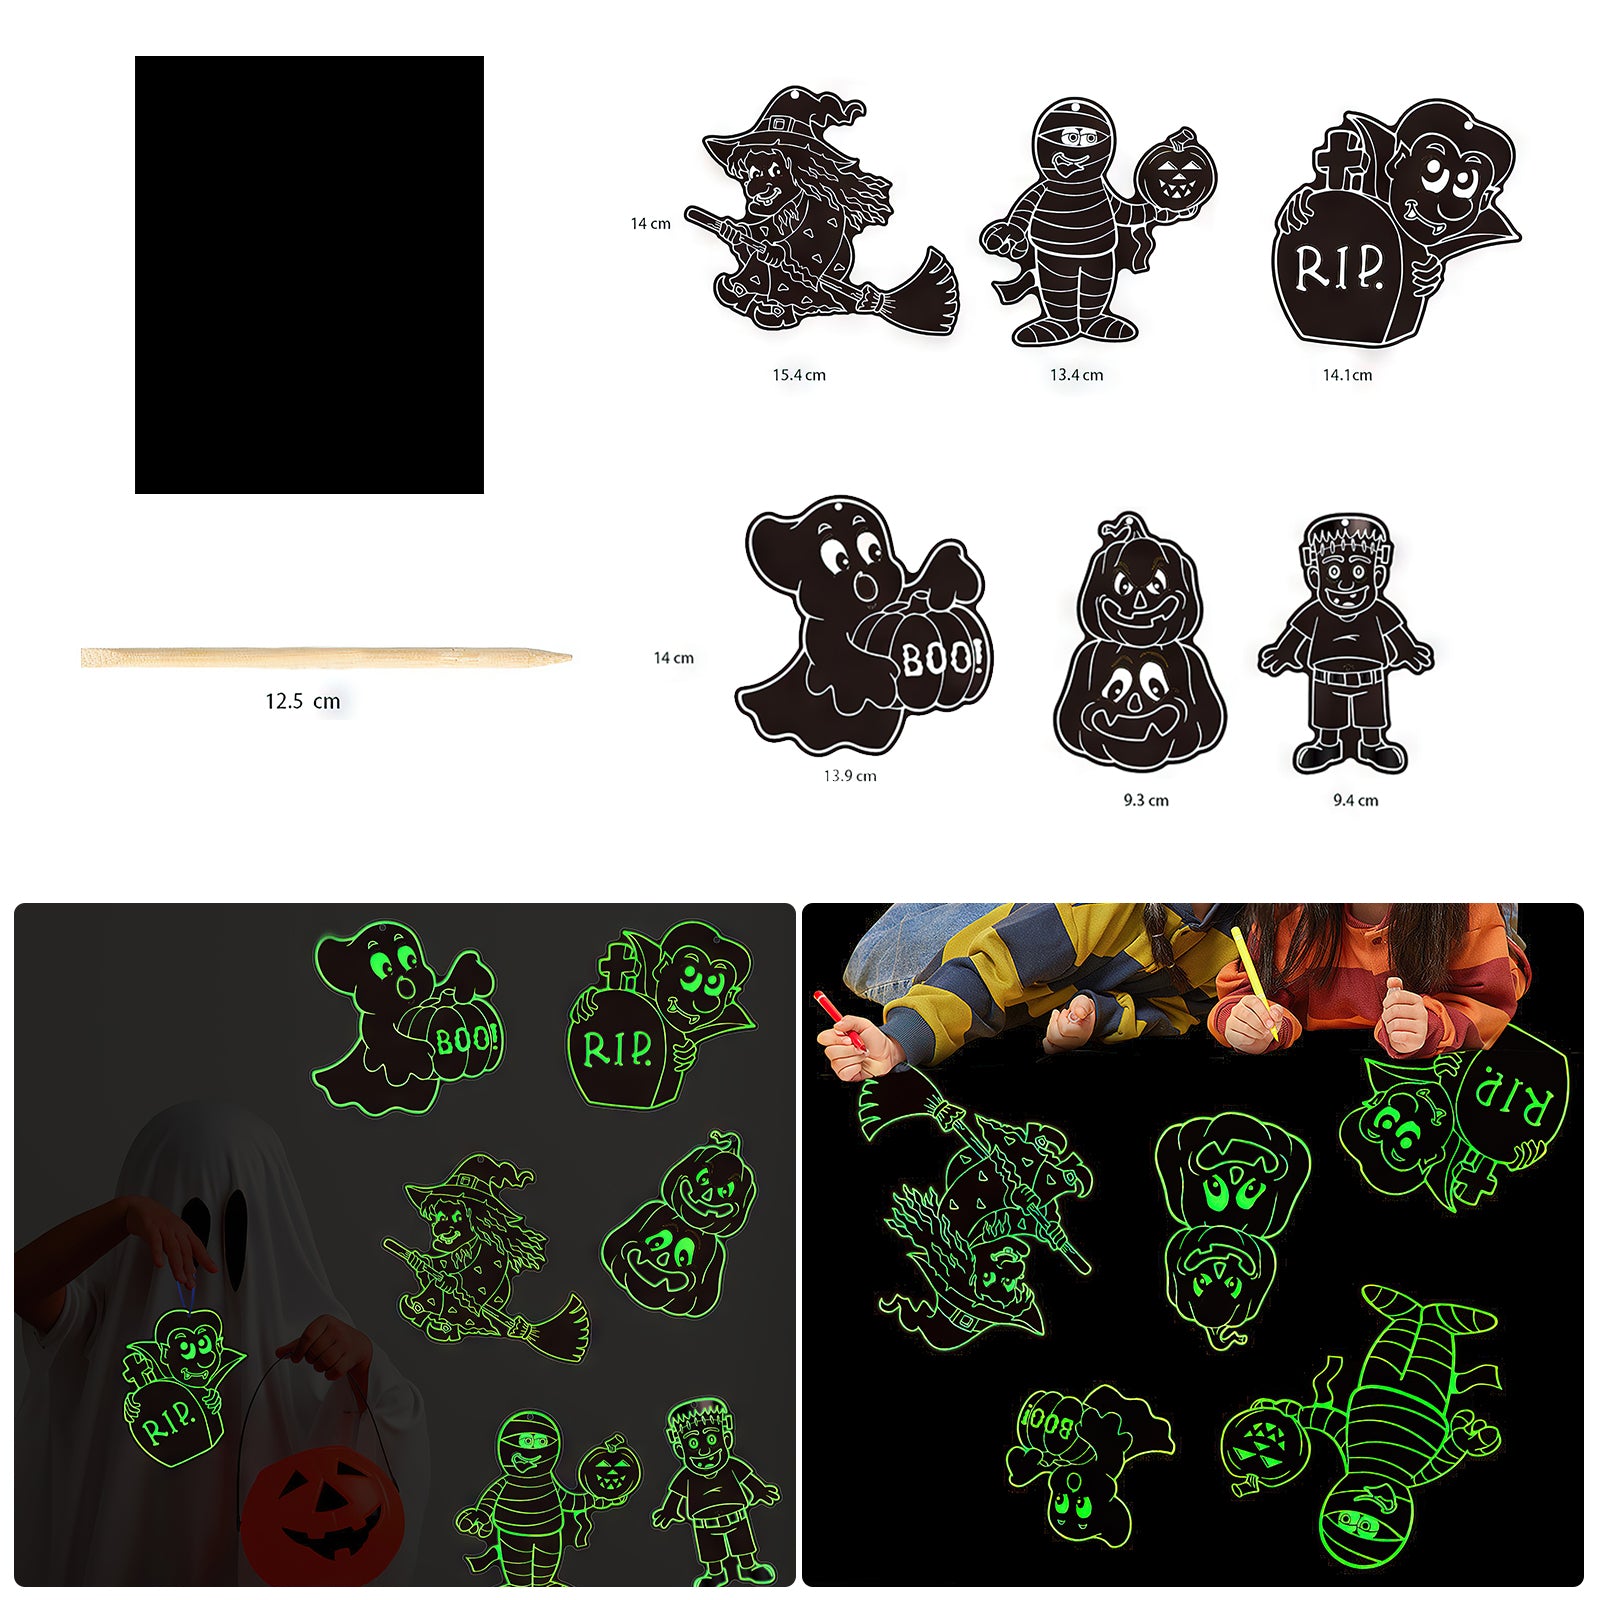 The image showcases a variety of Halloween-themed glow-in-the-dark stickers, including characters like a witch, mummy, ghost, pumpkin, and gravestone. There are also dimensions for each sticker and a picture of children using these fun crafts in a dark setting. In the background, you can see the 50pcs A4 Luminous Scratch Paper Fluorescent Scratch for Falcon Laser Engraving by CrealityFalcon being used to create intricate designs that add an extra layer of creativity to the project.